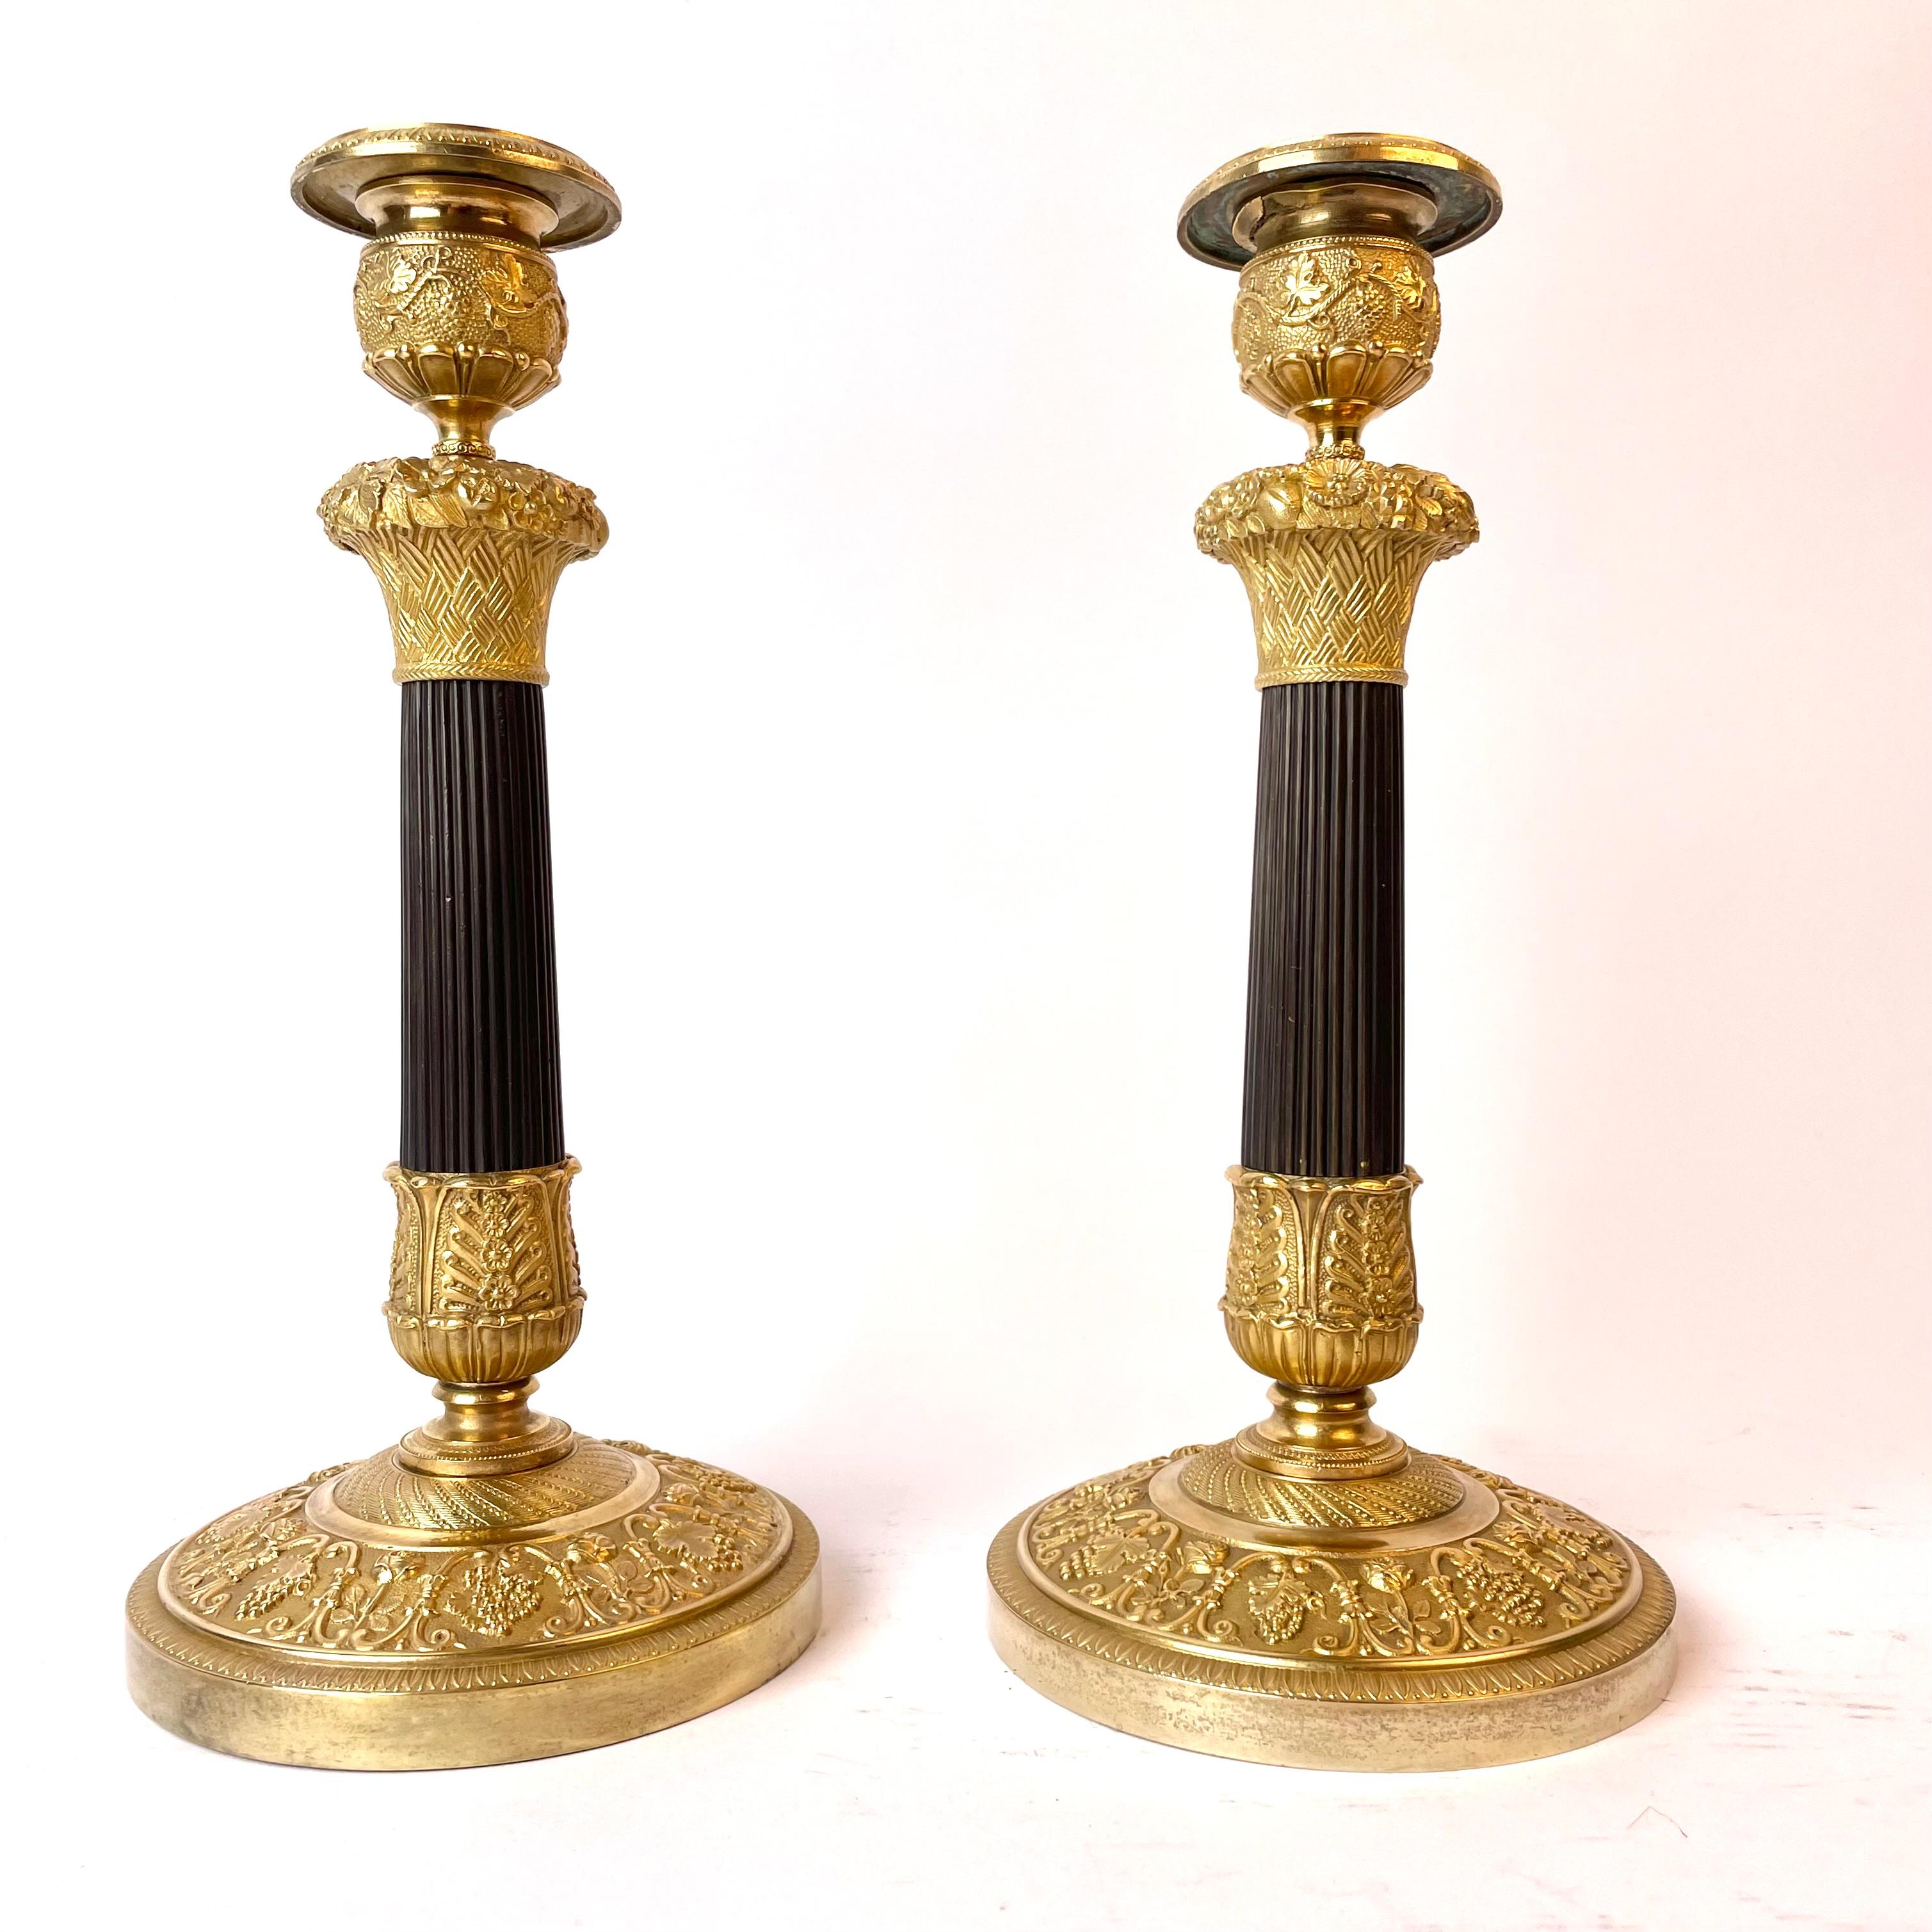 A beautiful pair of French Empire gilt and dark patinated bronze candlesticks from the 1820s. Decorated with flower baskets and bunches of grapes and a dark patinated column.


Wear consistent with age and use.